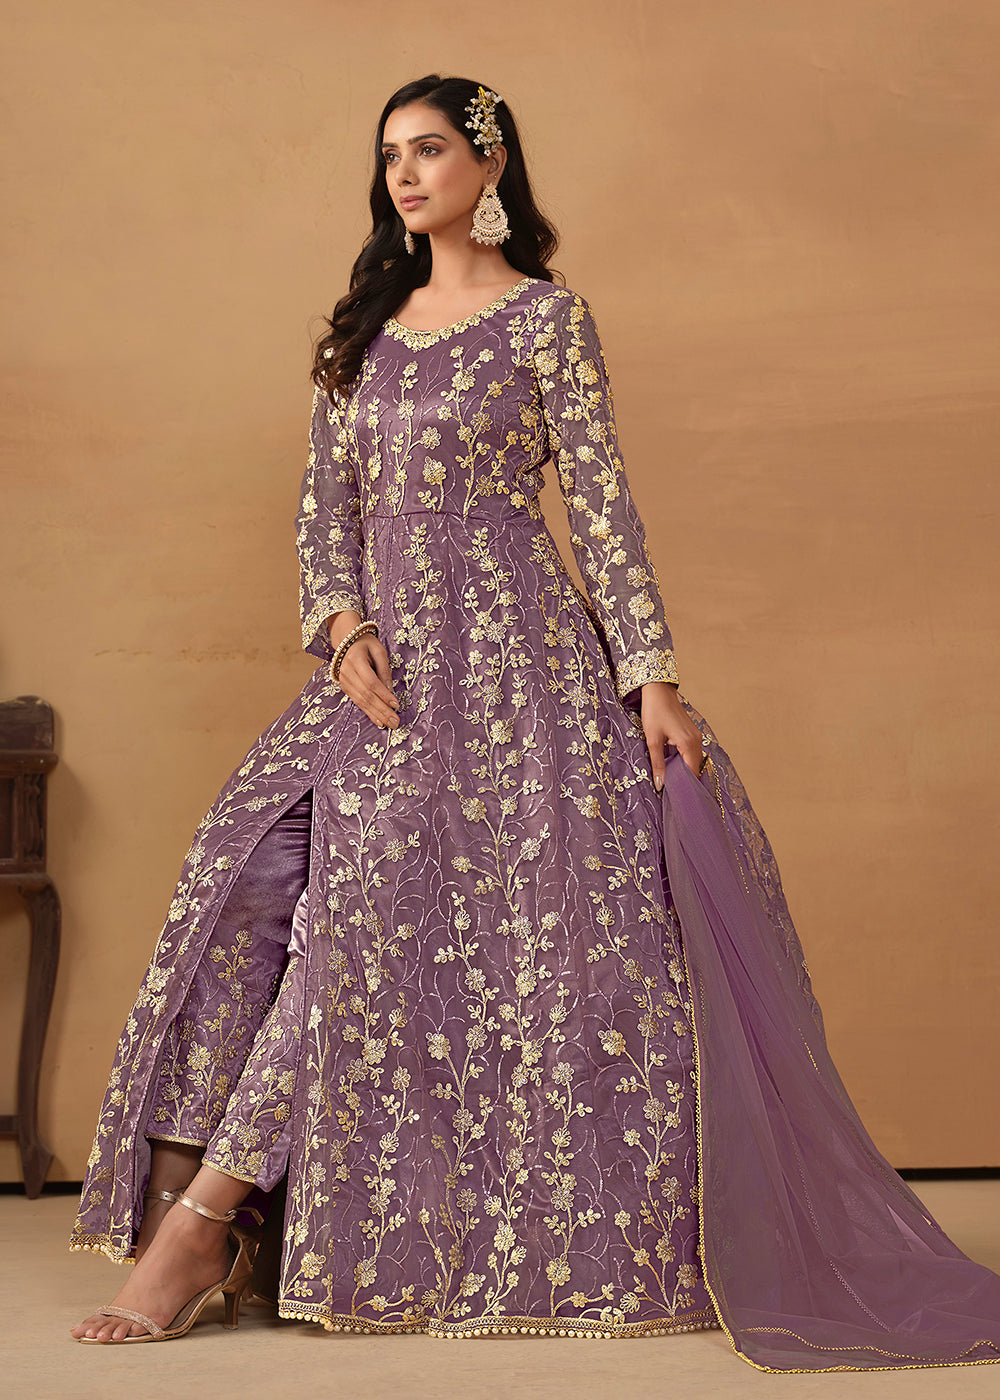 Buy Now Pant Style Purple Embroidered Net Wedding Anarkali Suit Online in USA, UK, Australia, New Zealand, Canada & Worldwide at Empress Clothing.